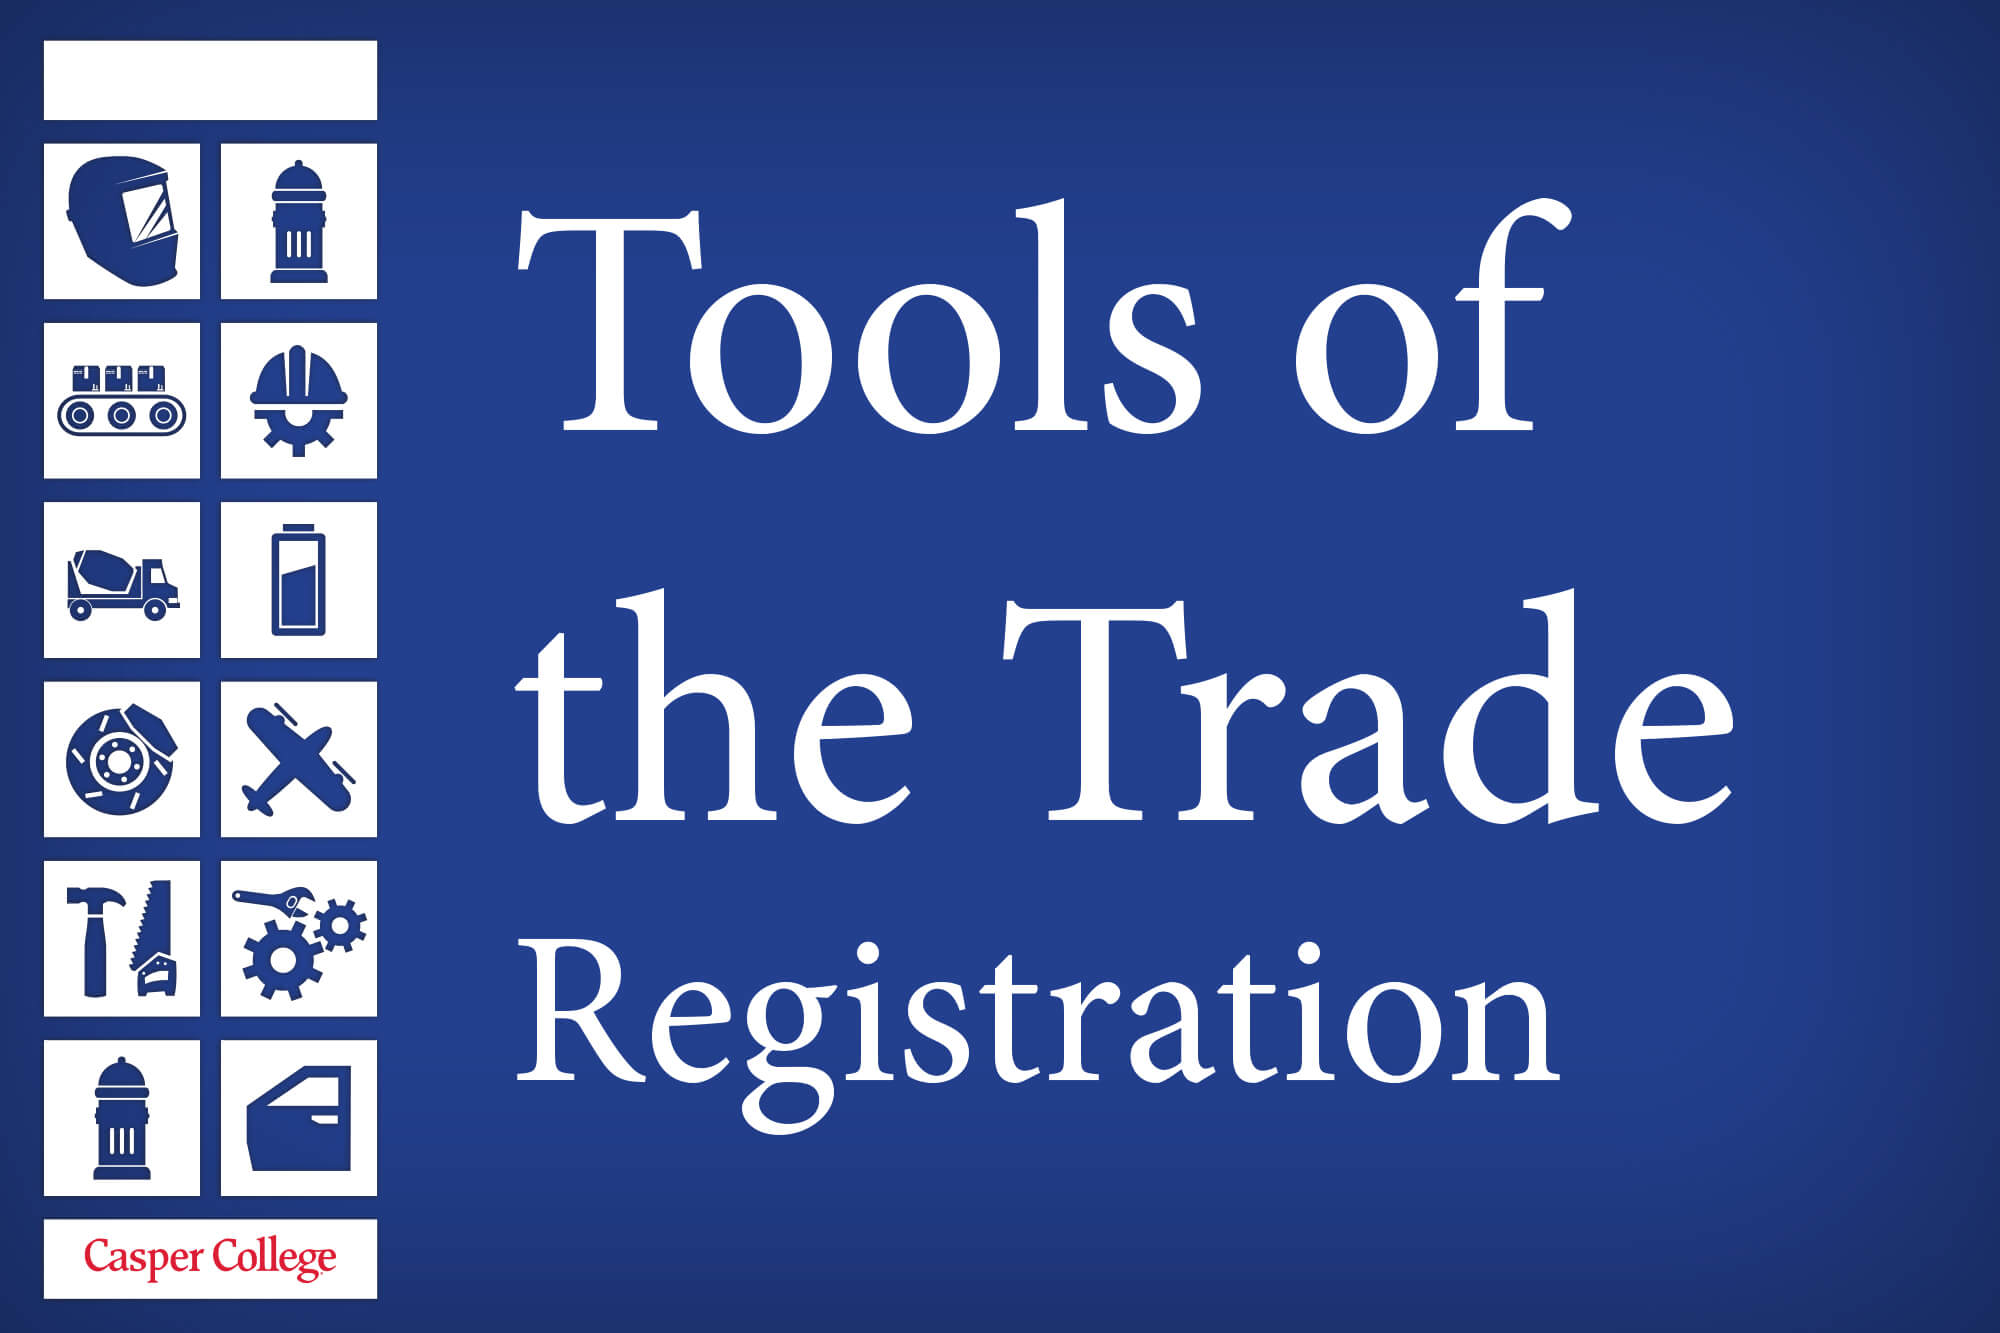 Image for "Tools of the Trade" press release.